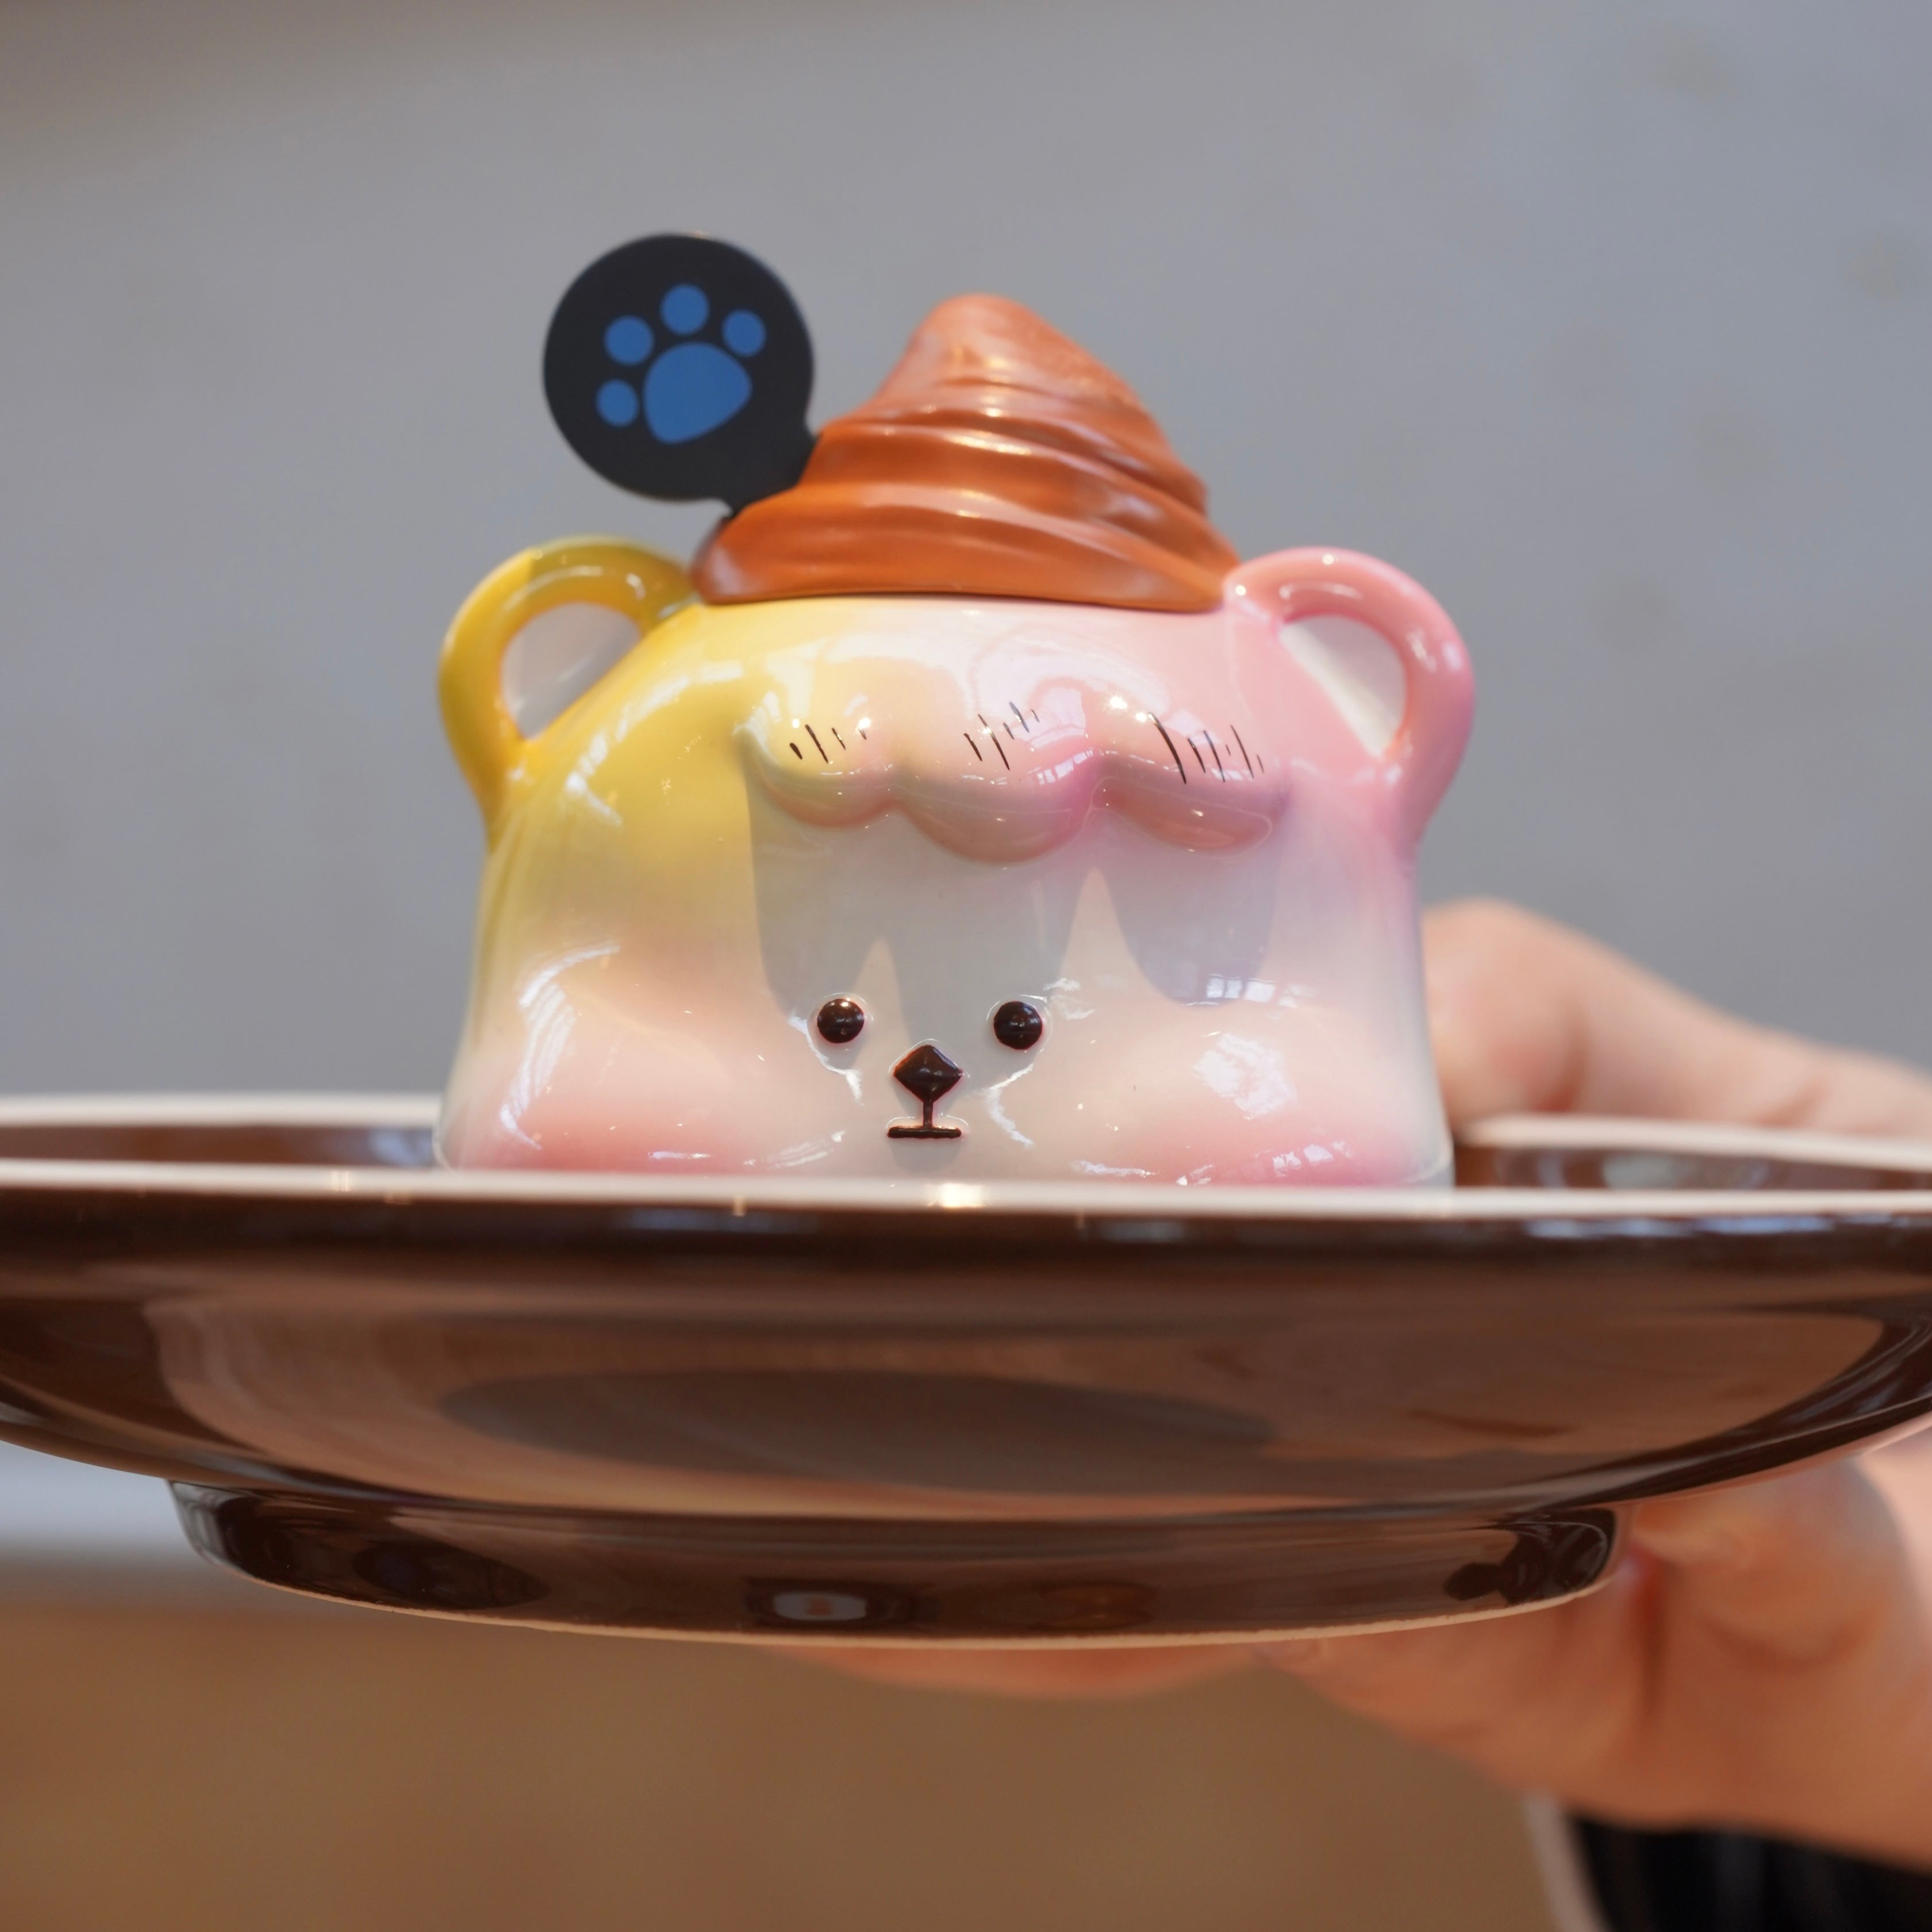 A hand holding a plate with a small toy, a ceramic bear, and a blue paw print, part of Croissant Han Han by Unknown Island - Preorder.